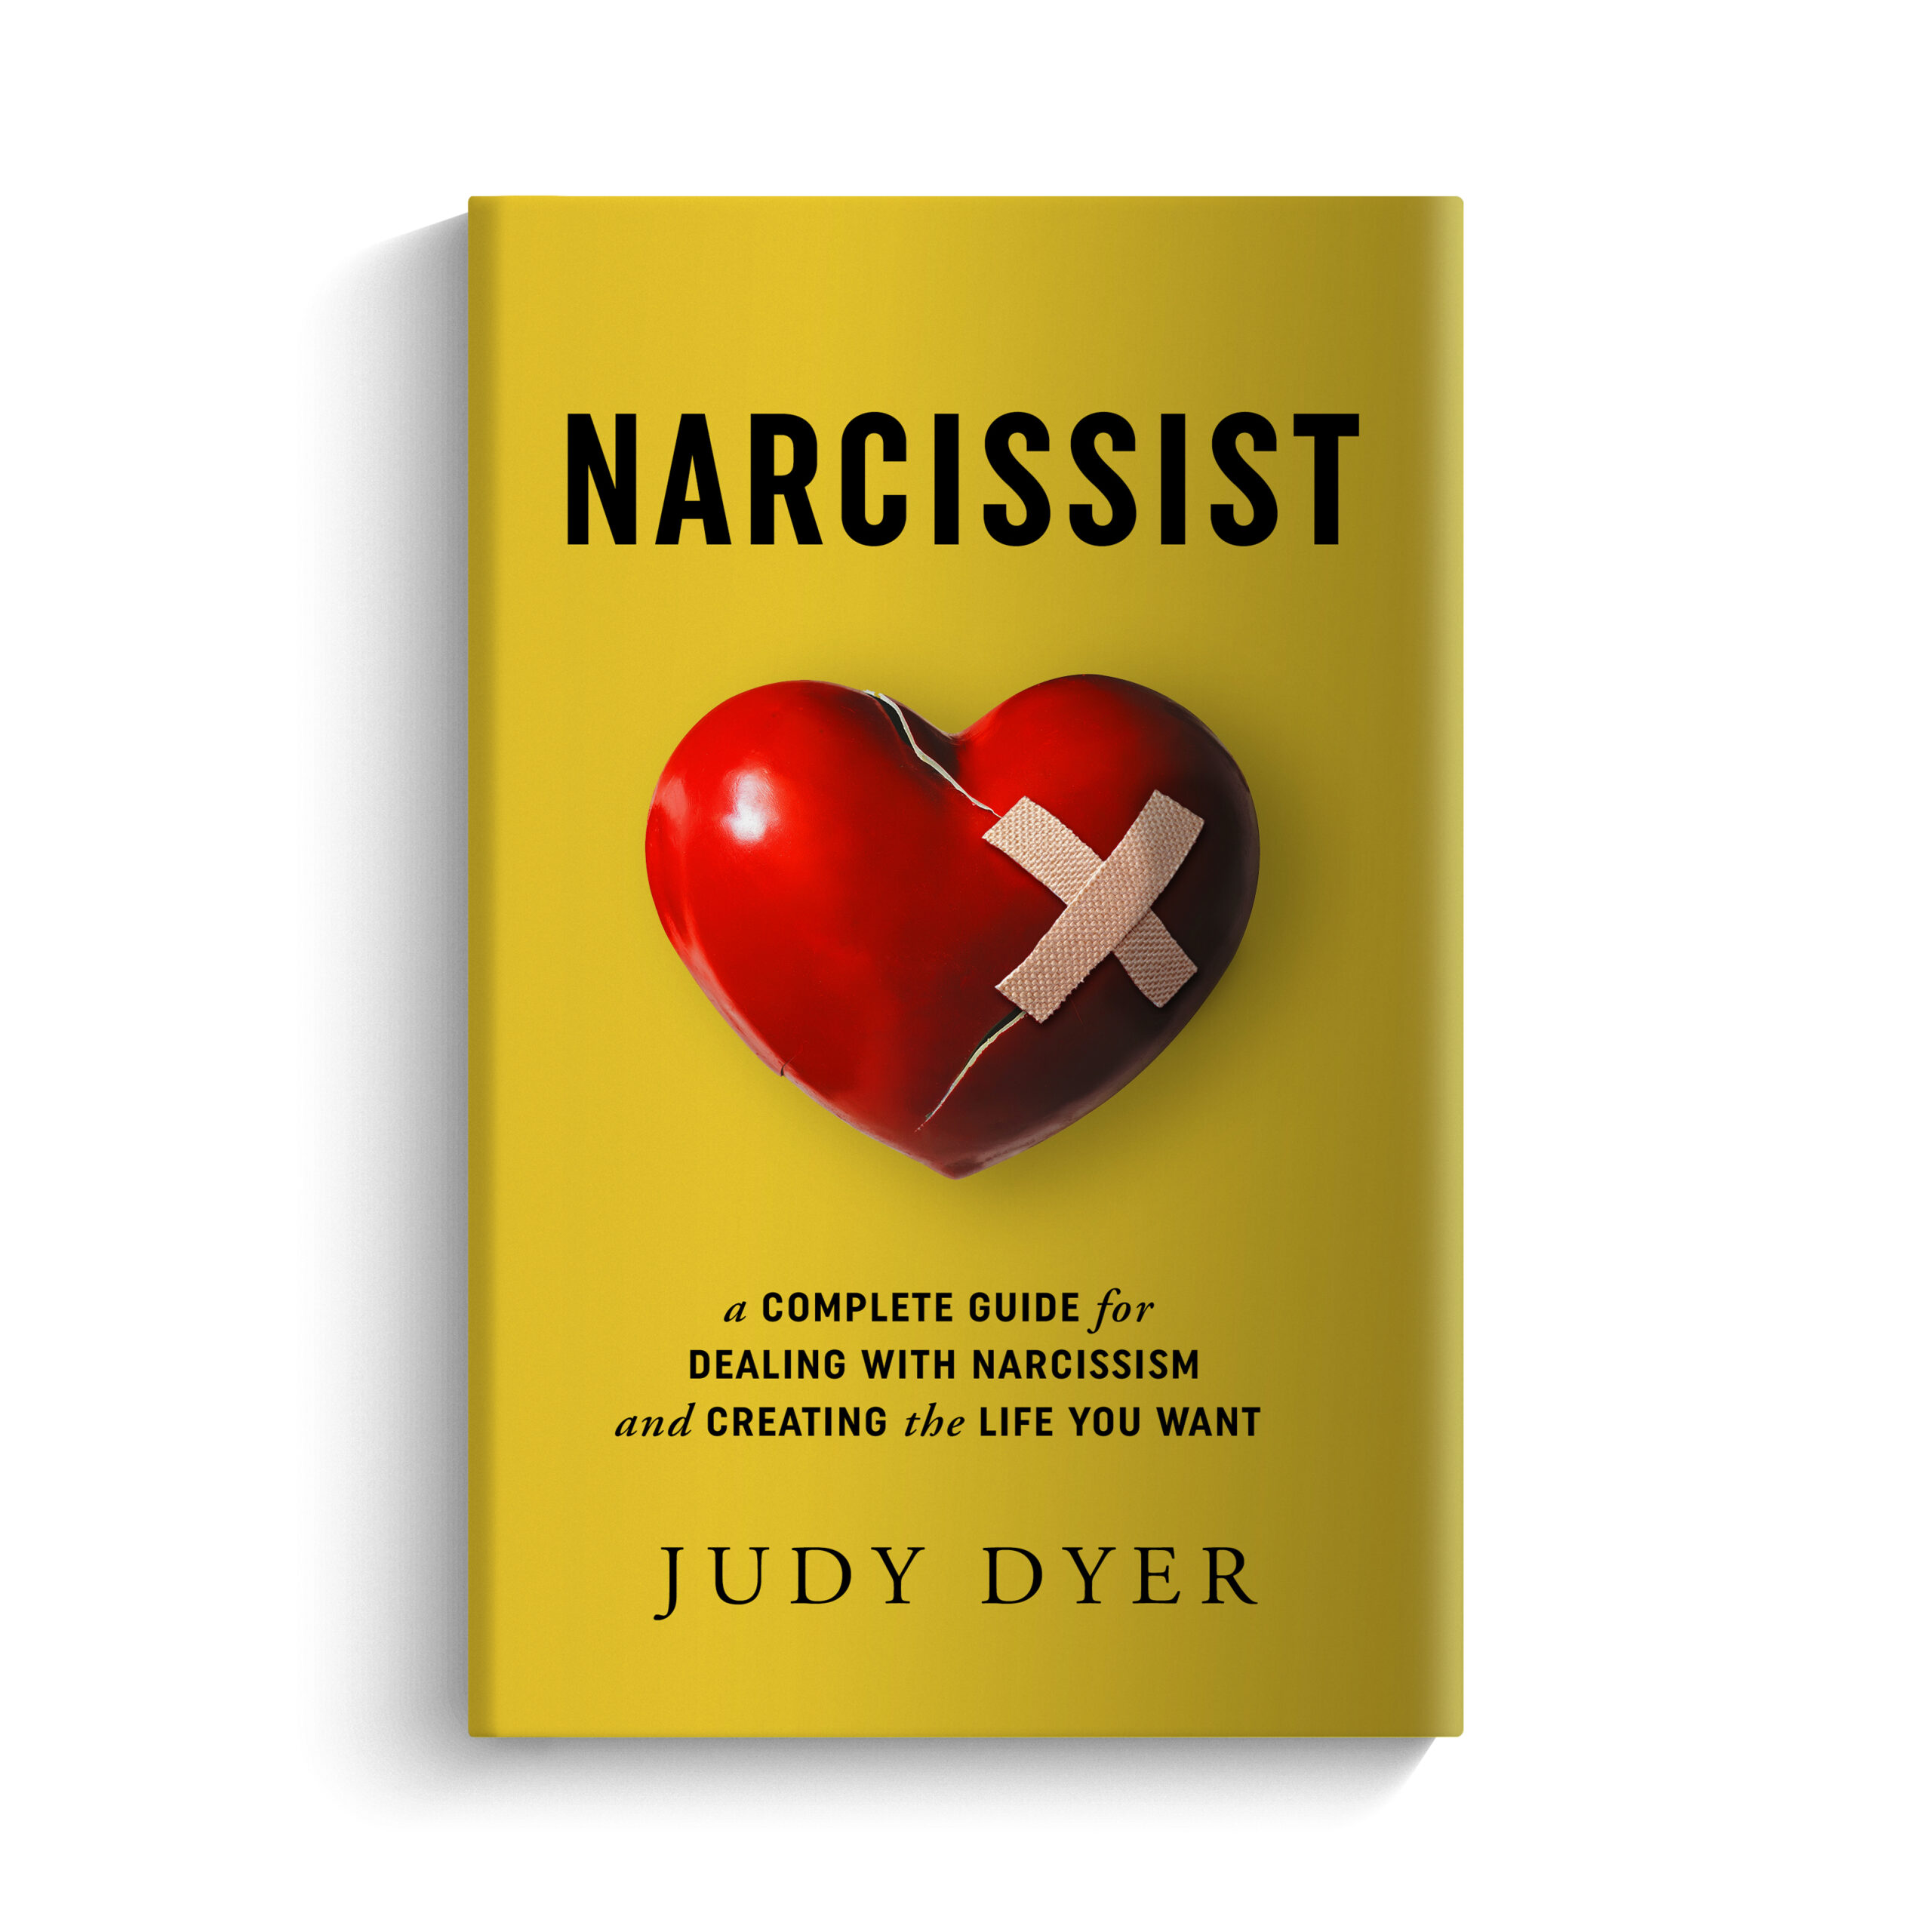 Narcissist by Judy Dyer